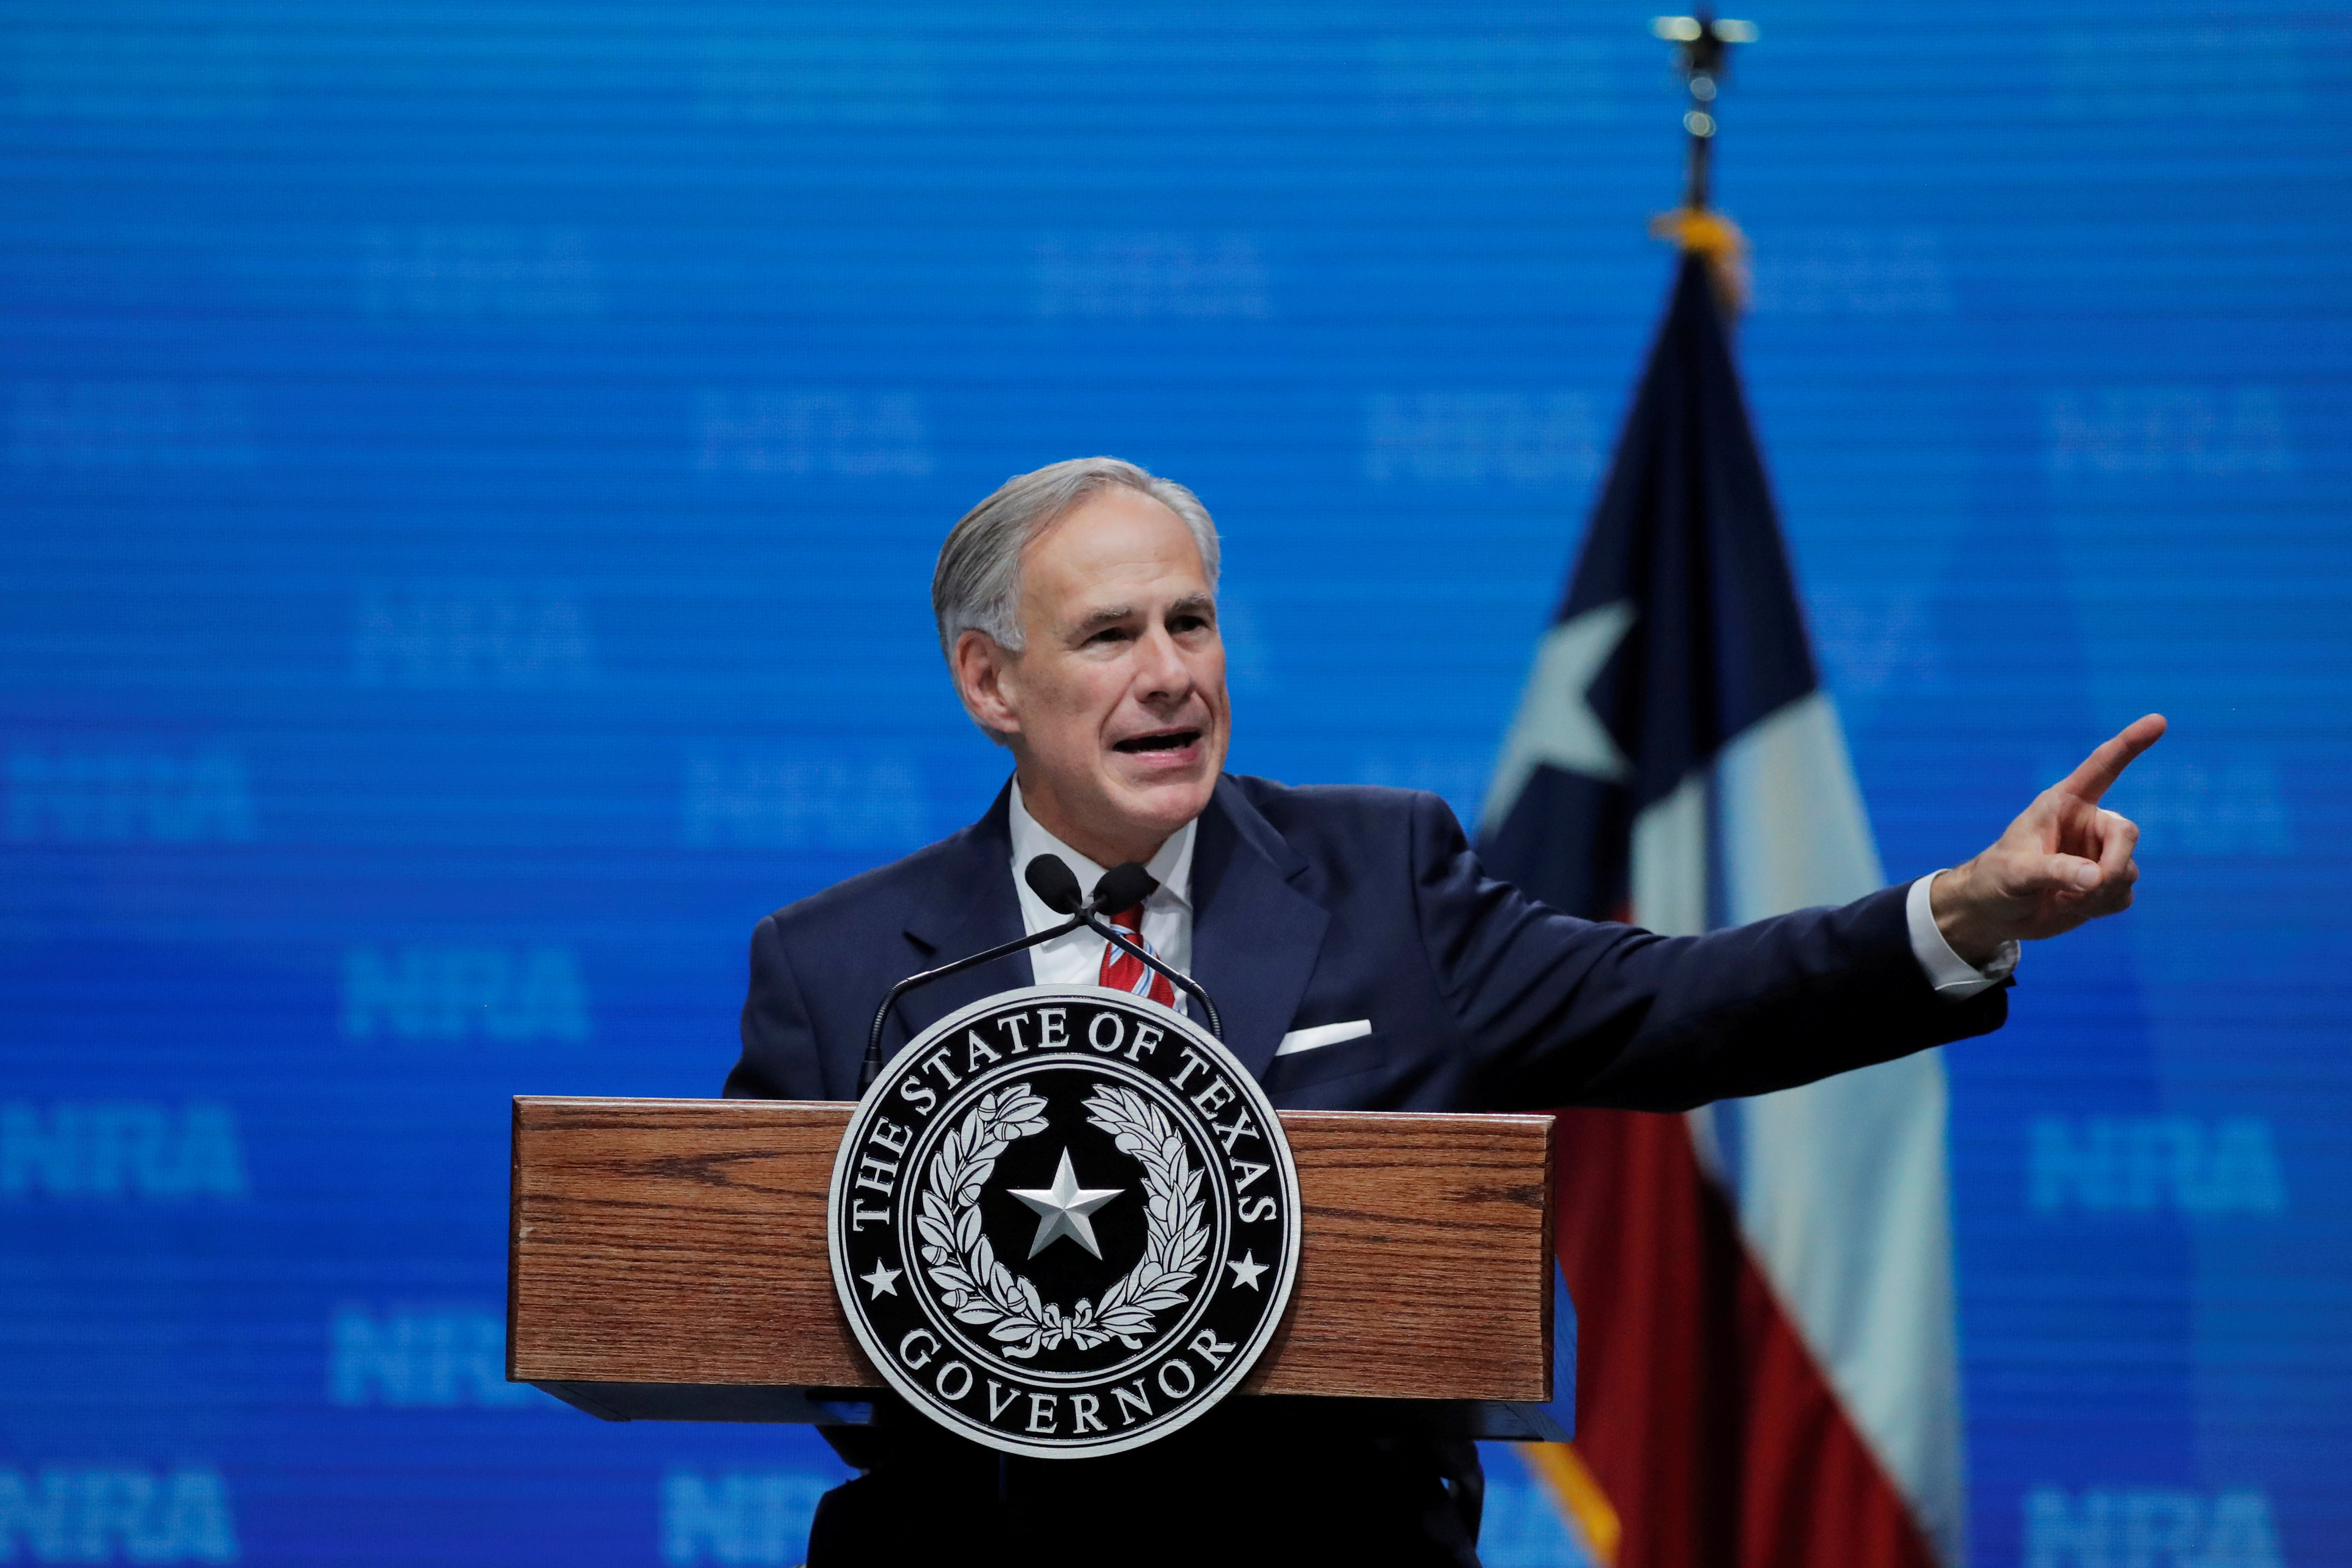 Texas Governor Greg Abbott speaks at the annual National Rifle Association (NRA) convention in Dallas, Texas, U.S., May 4, 2018. REUTERS/Lucas Jackson